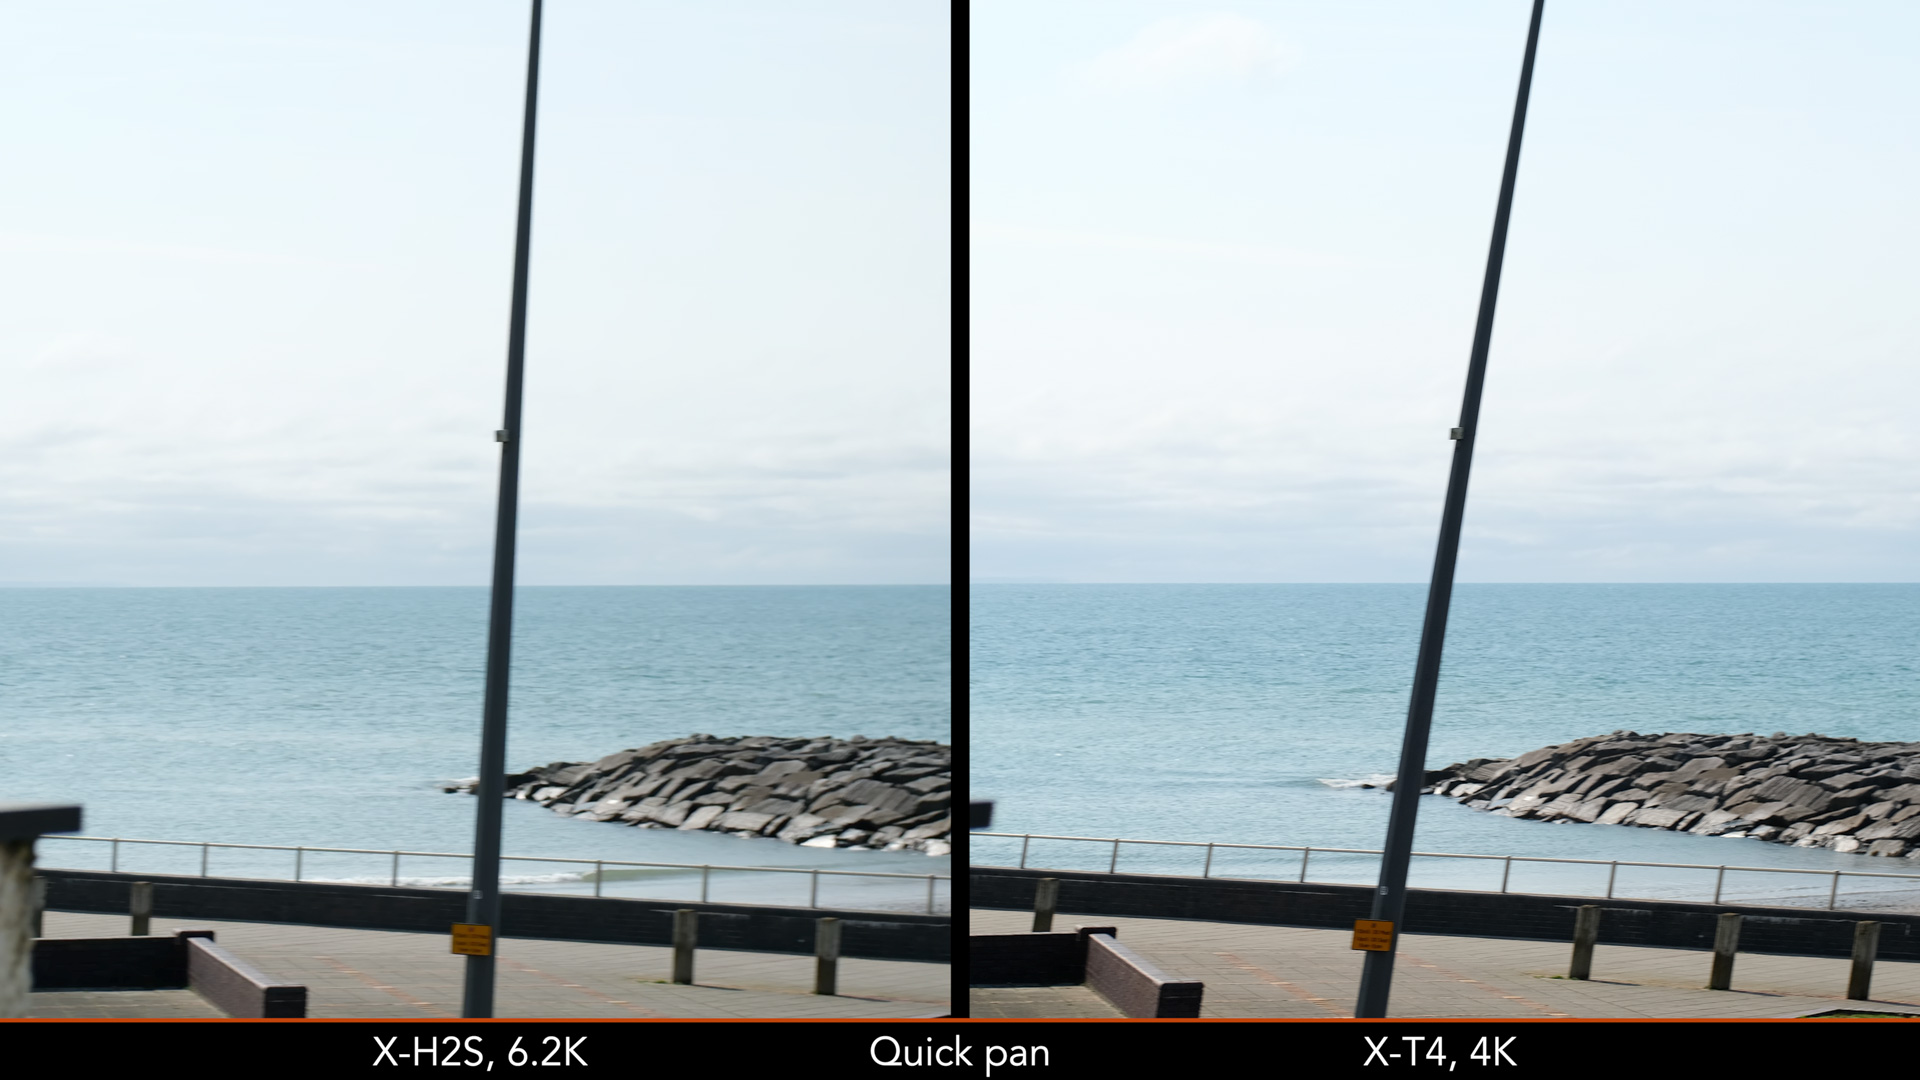 Side by side image showing the distortion when panning quickly with the X-H2S in 6.2K and the X-T4 in 4K.